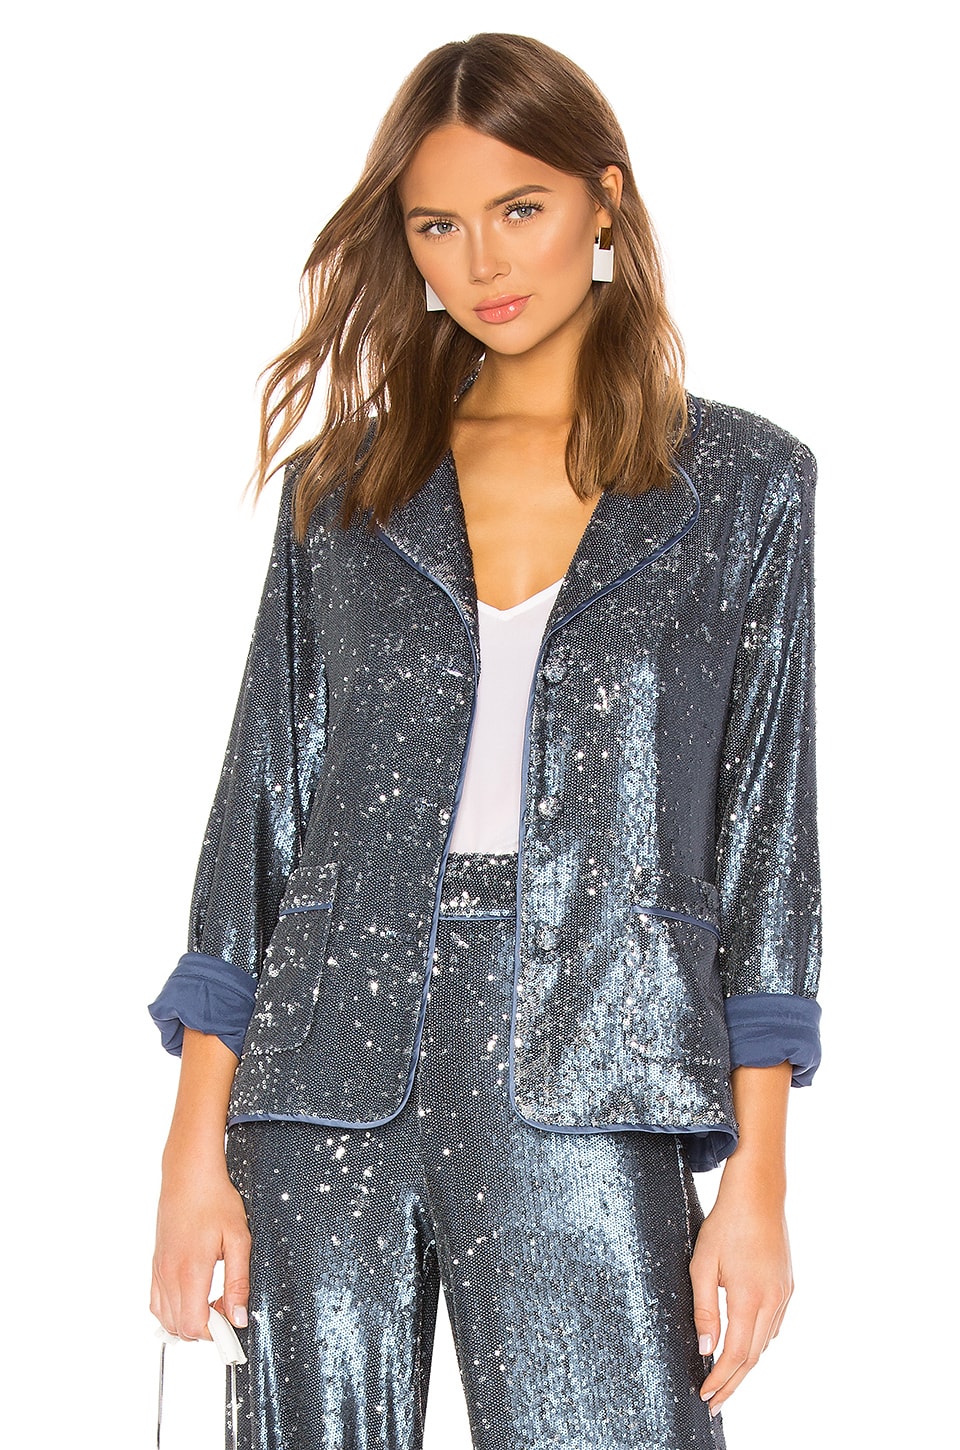 Alexis Ripley Jacket in Marine Blue Sequins | REVOLVE